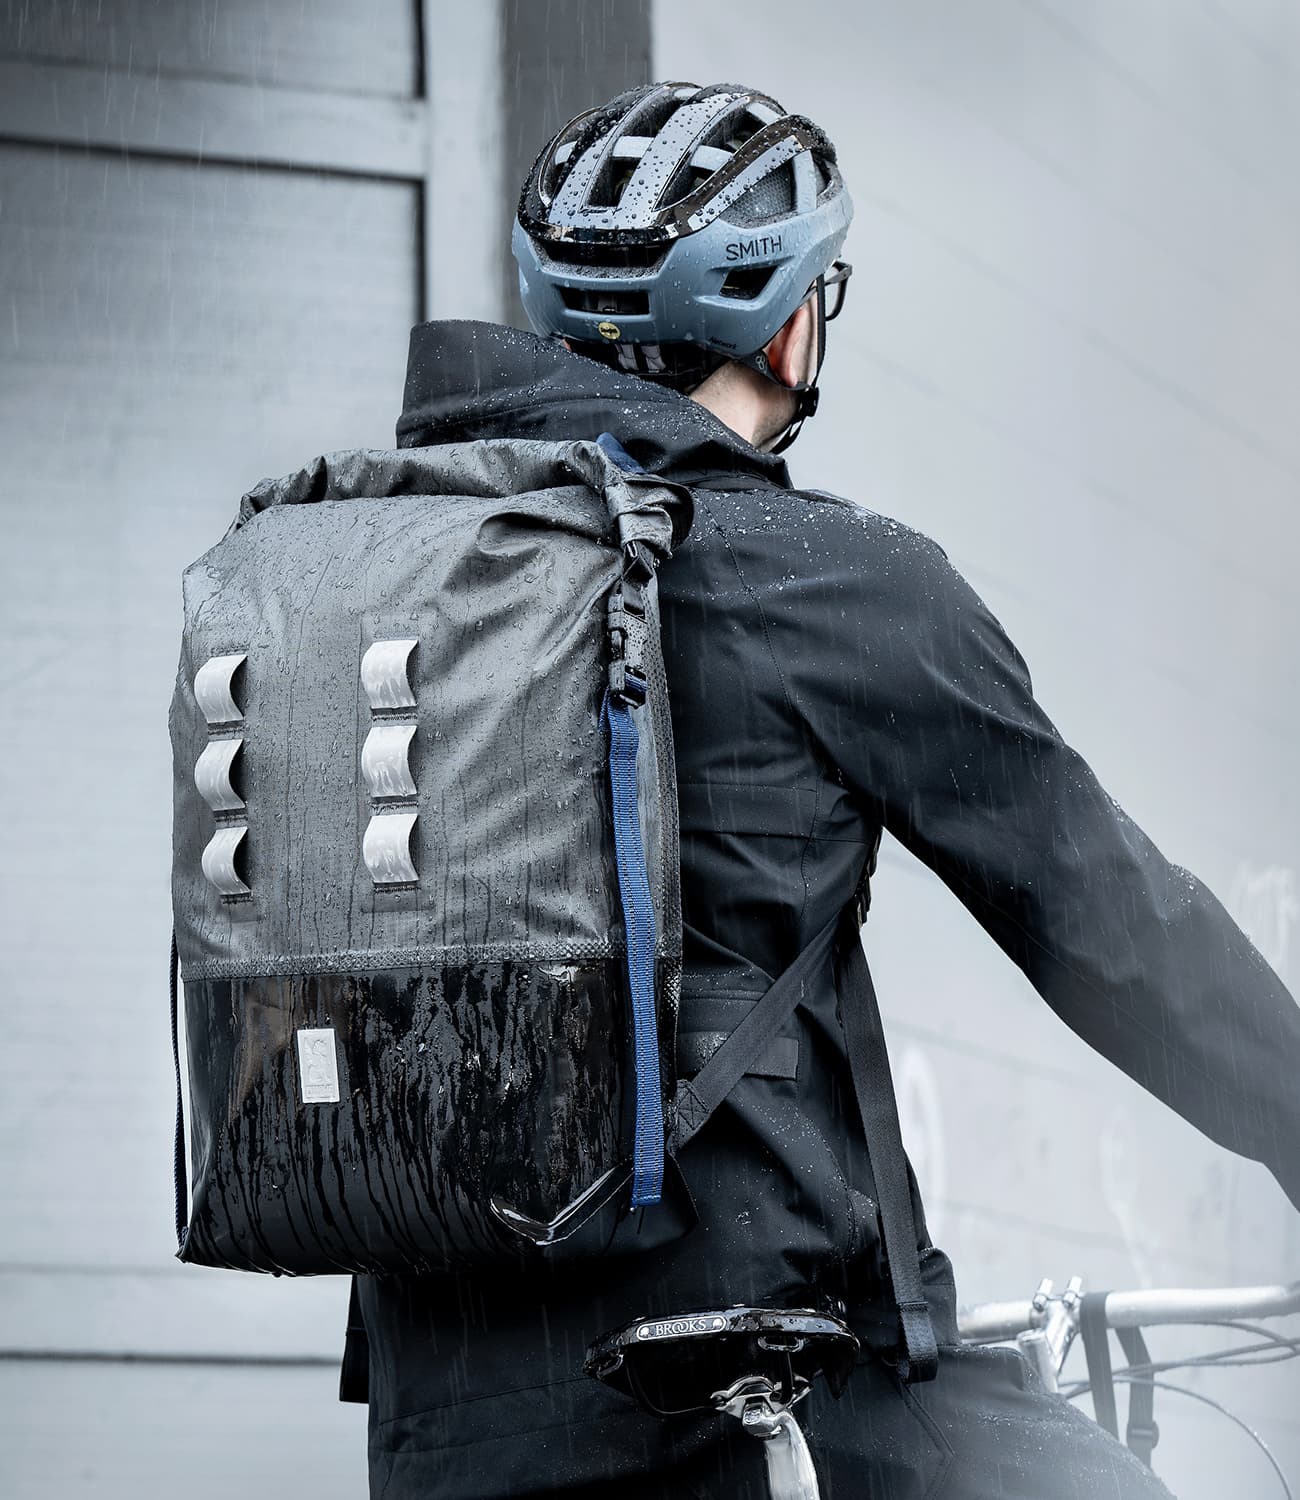 Urban Ex 30L Backpack worn by a guy on a bike in the rain mobile image size